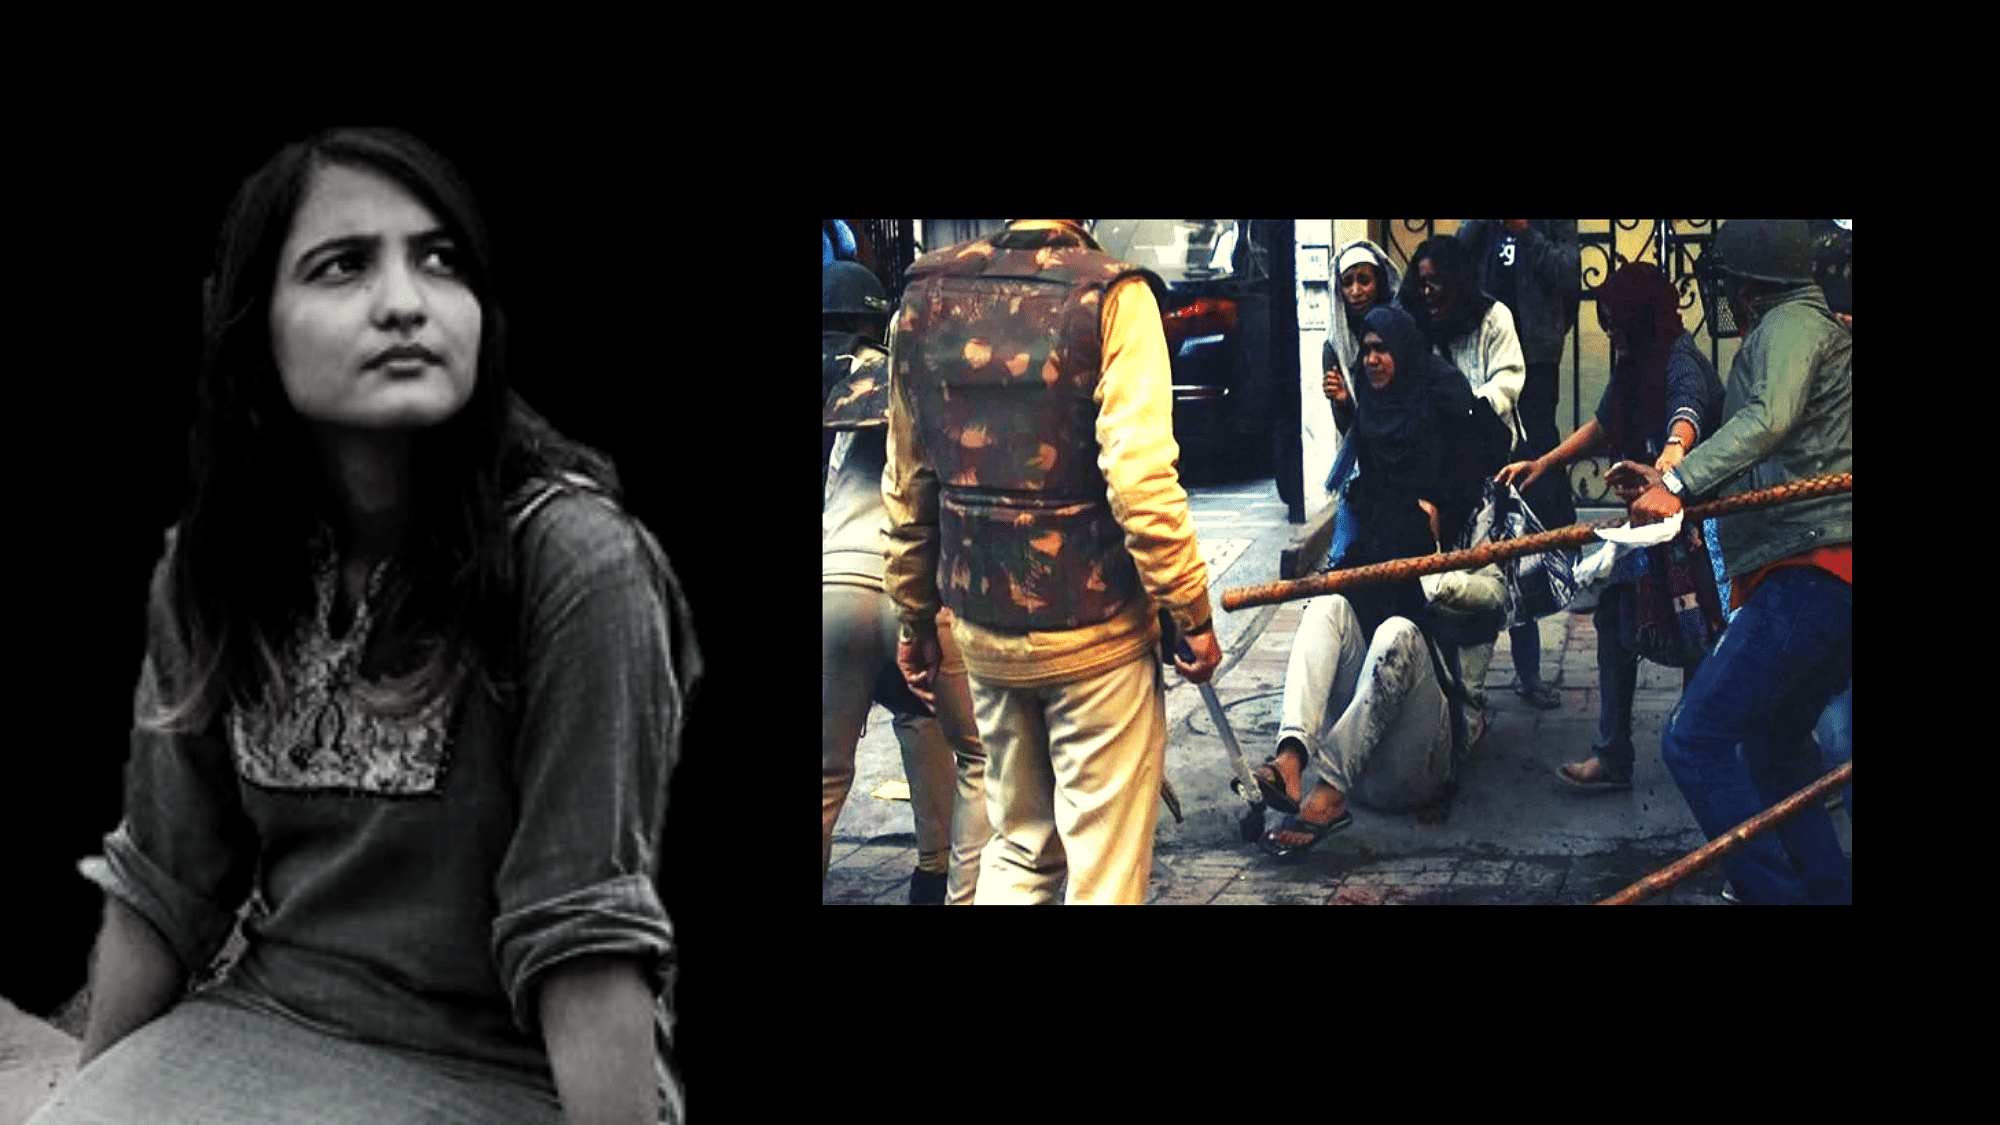 Saher Naqvi describes her harrowing experience on the night of 15 December, when Delhi Police undertook a brutal crackdown against the students’ protest at Jamia.